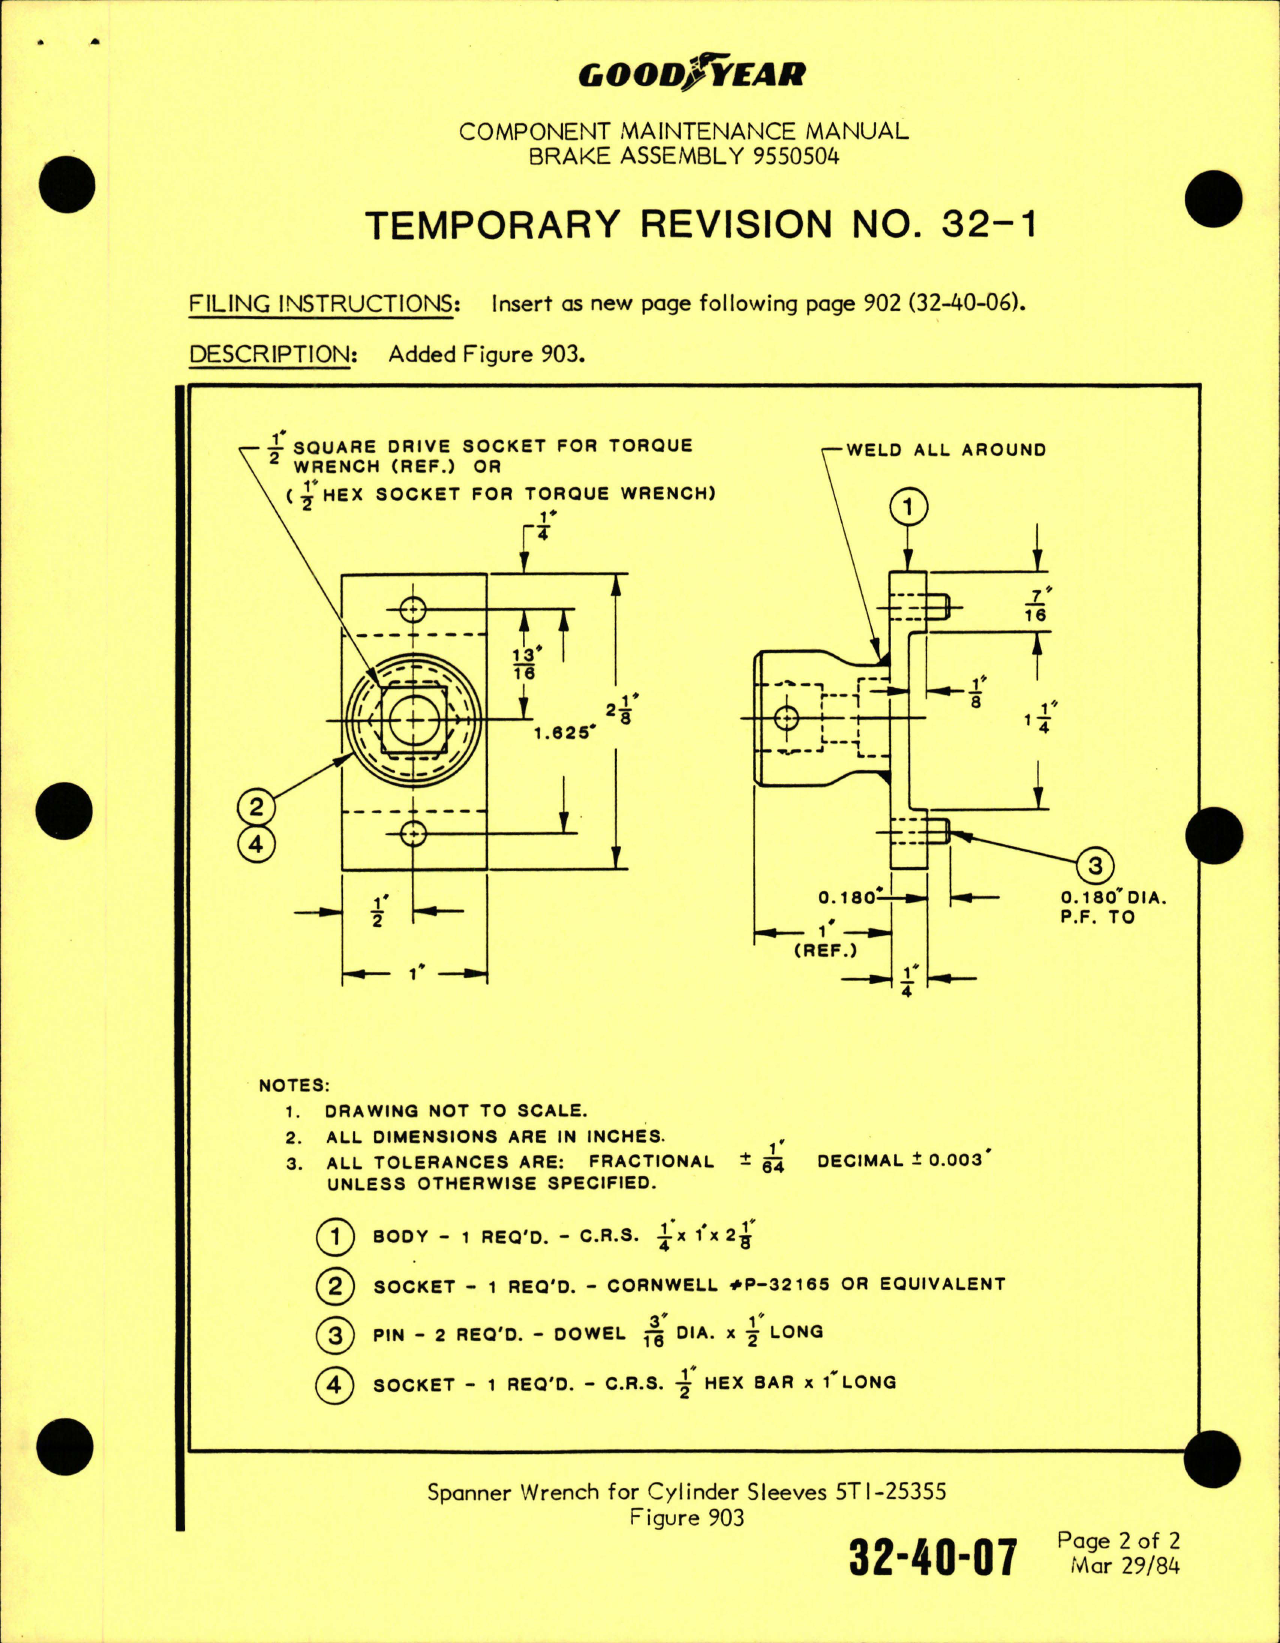 Sample page 9 from AirCorps Library document: Maintenance Manual with Illustrated Parts List for Brake Assembly - Part 9550504